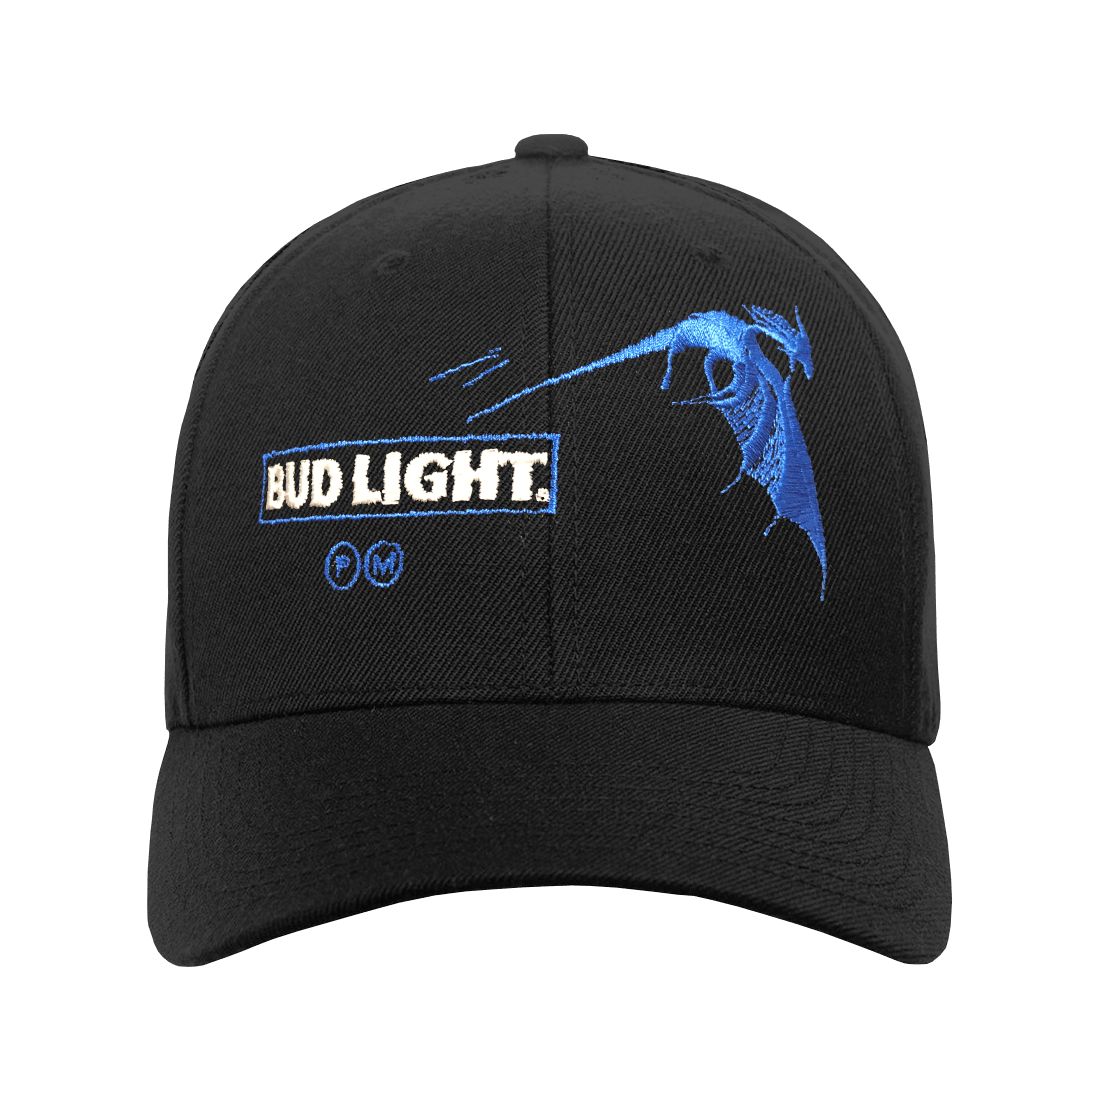 Post Malone and Bud Light Announce Limited Merch Collection